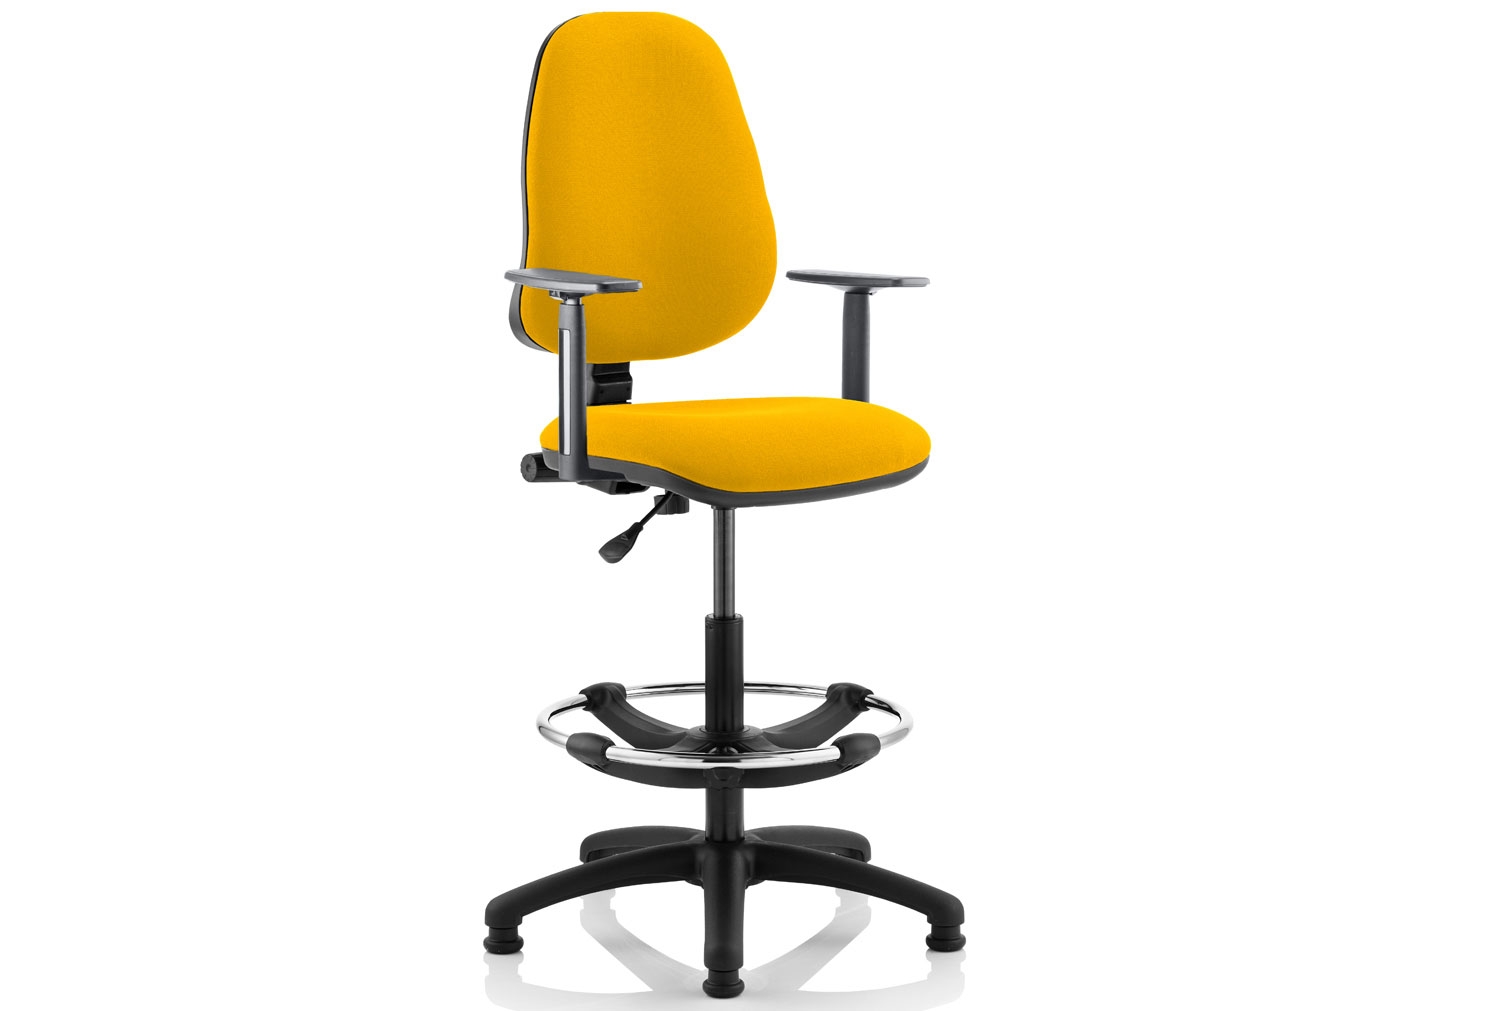 Lunar 1 Lever Draughtsman Office Chair (Adjustable Arms), Senna Yellow